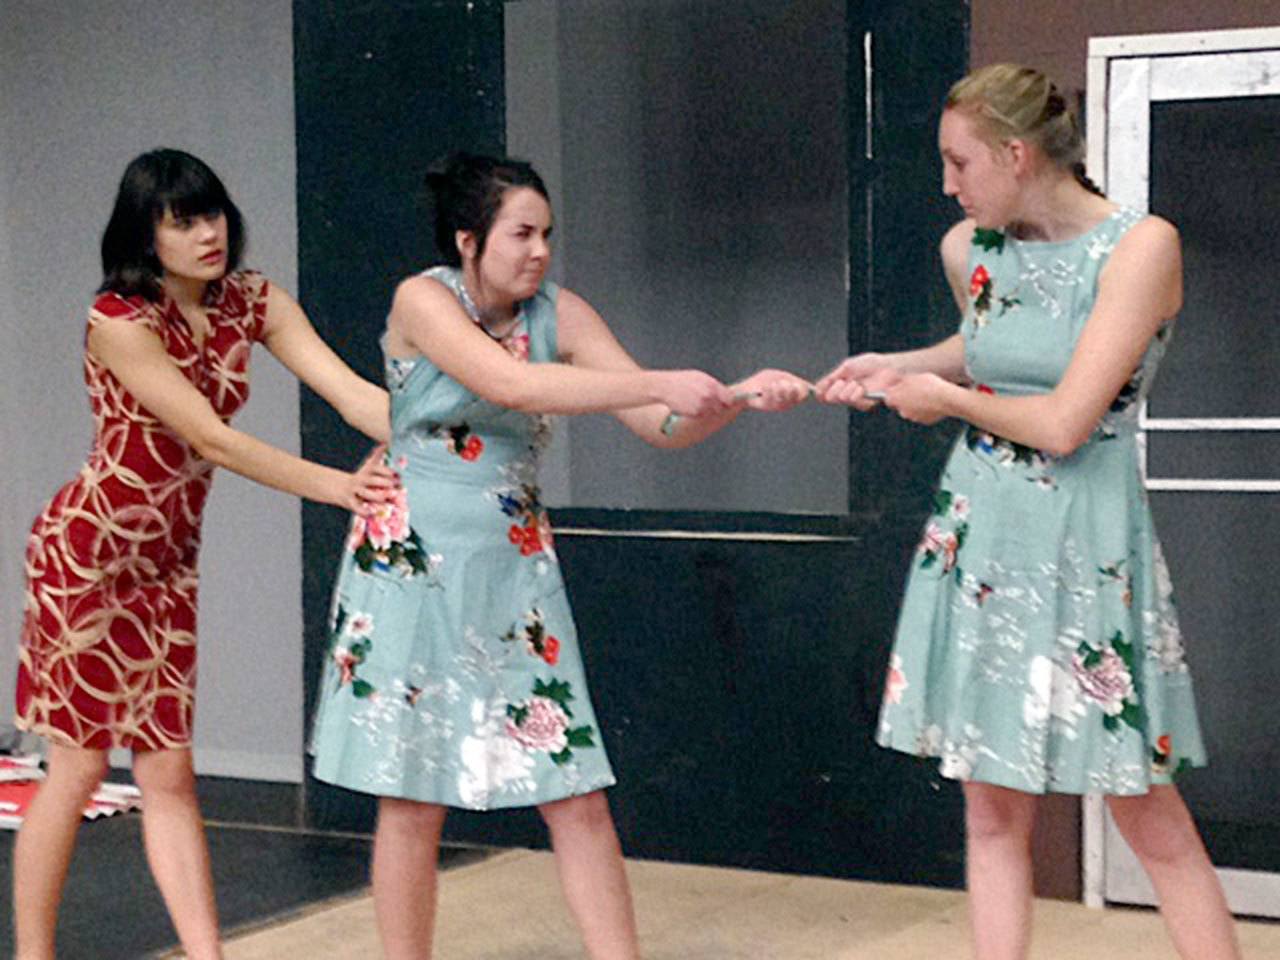 Two one-act plays look at friendship